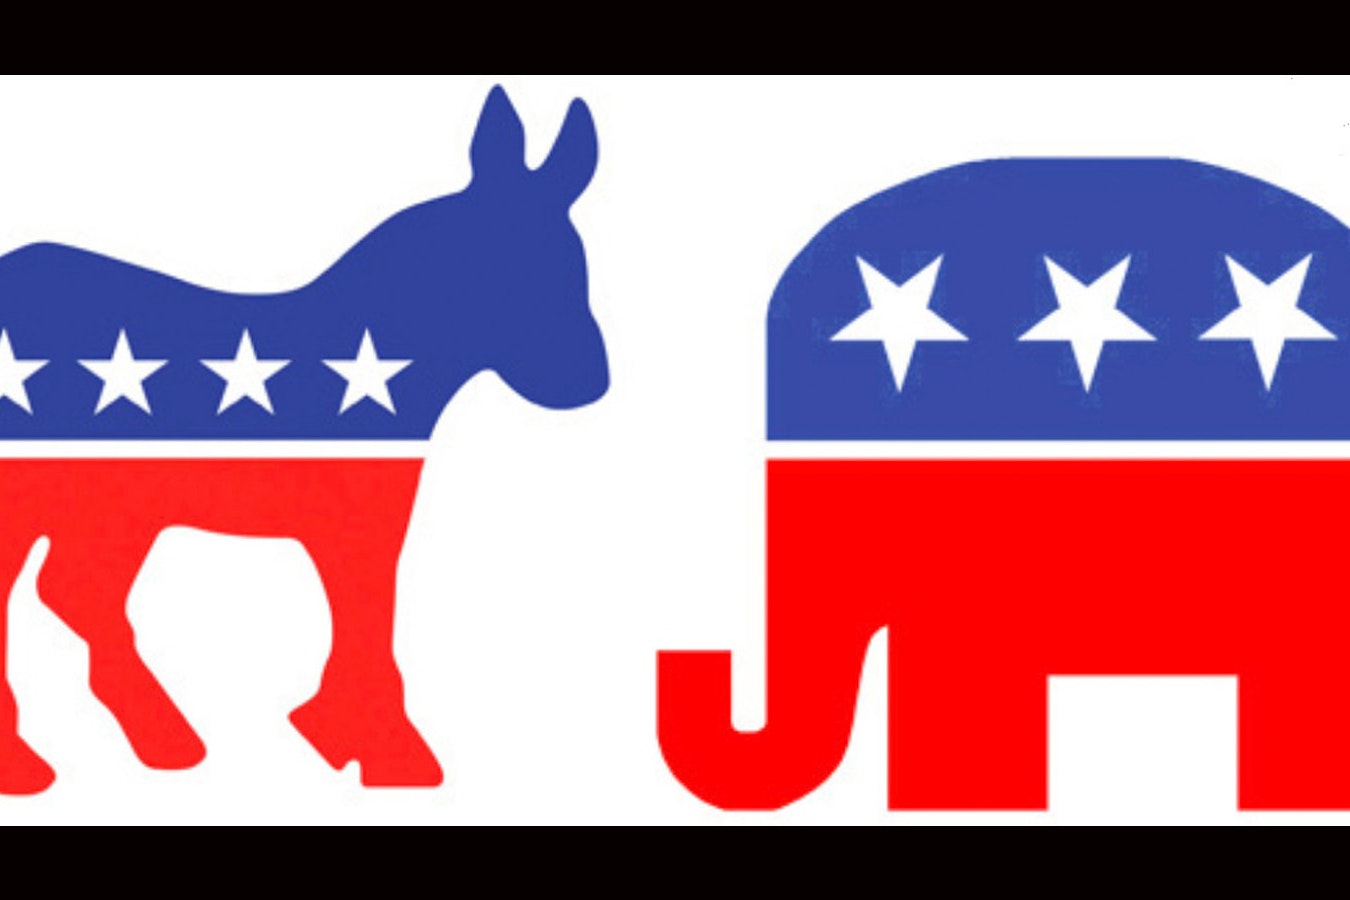 Gop and dems 2